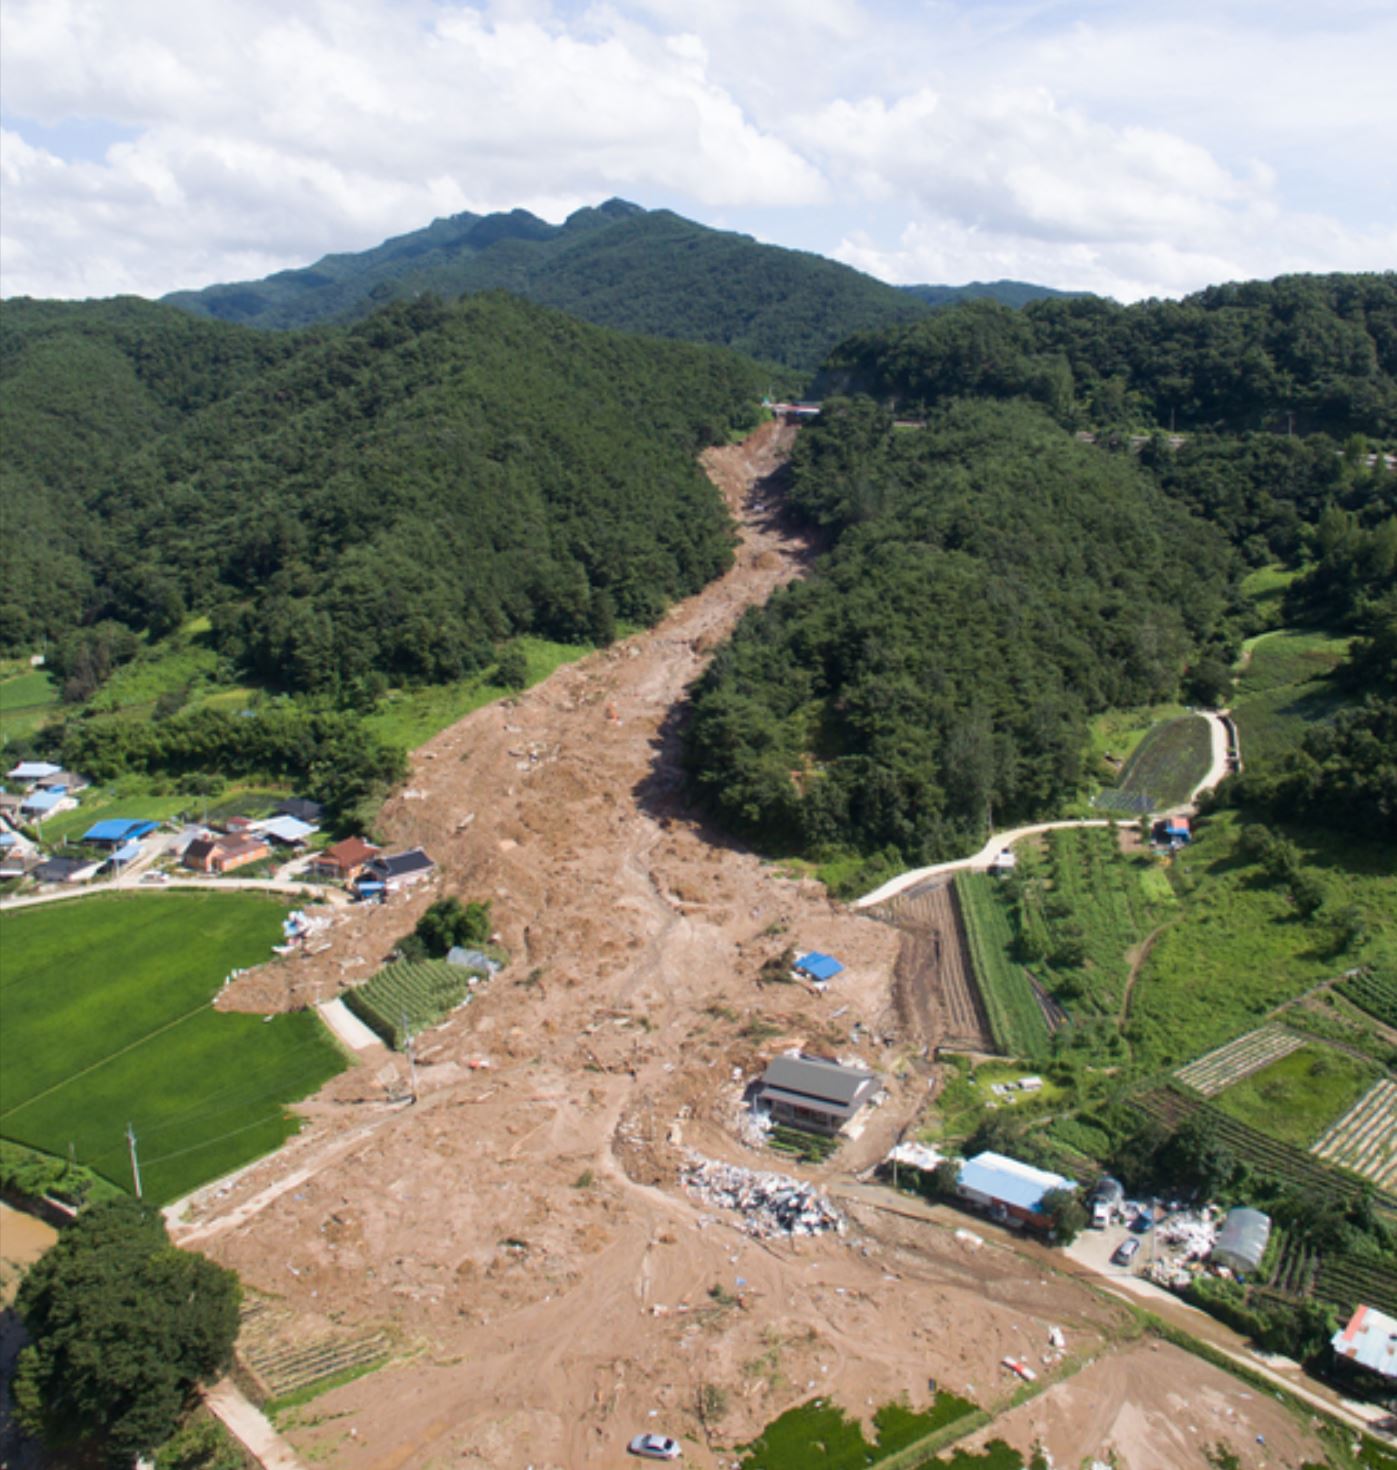 The landslide in Gokseong County, in South Korea